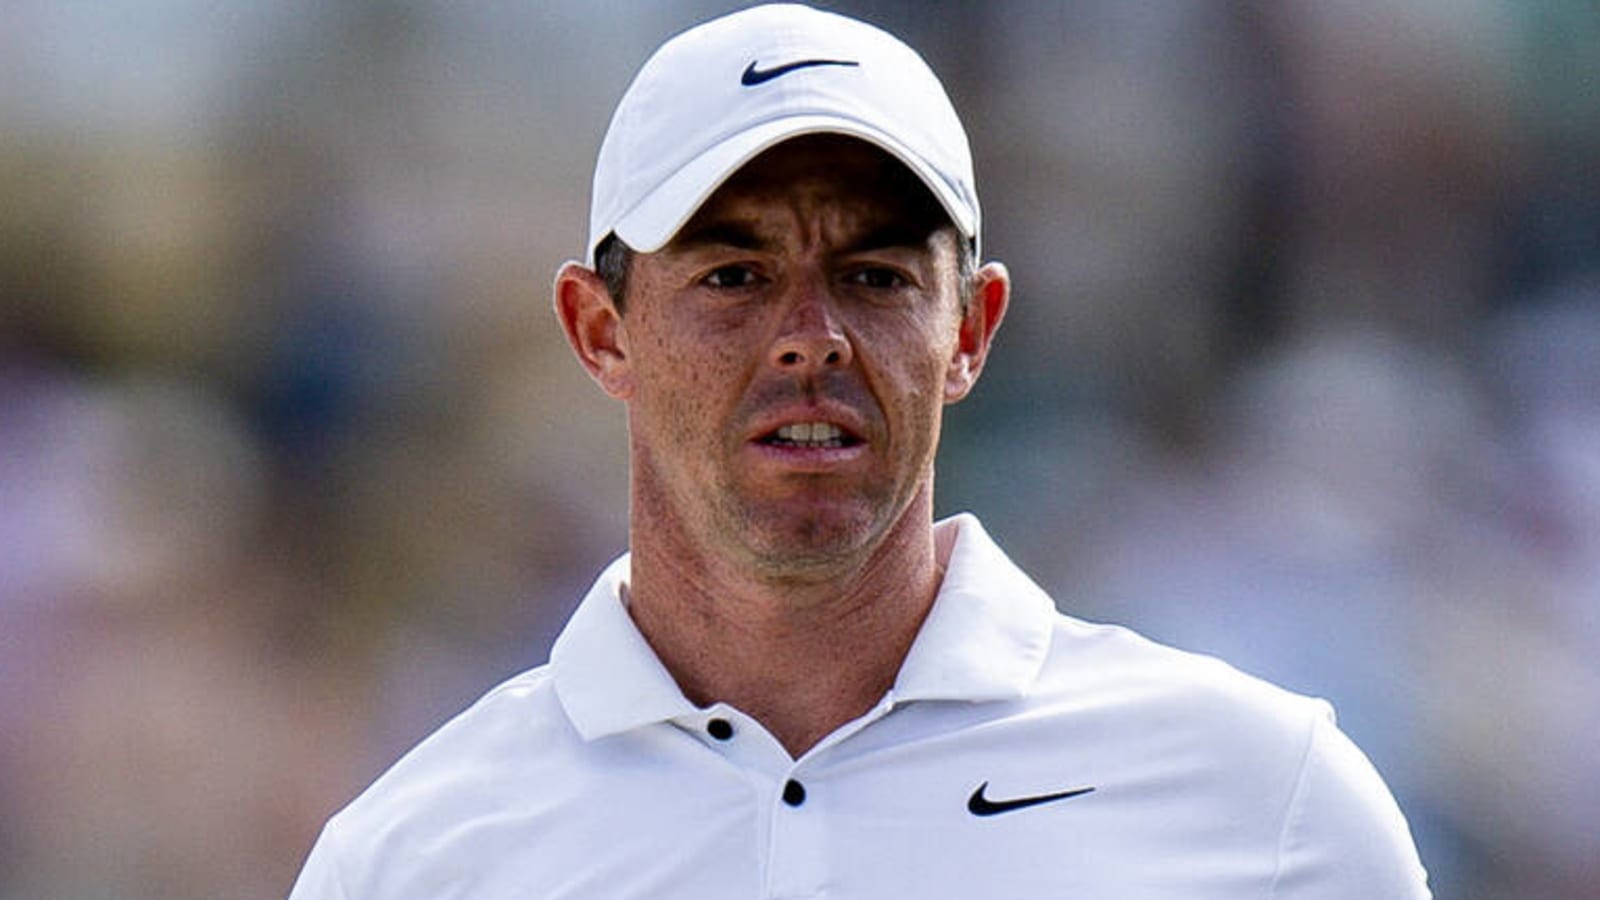 Rory McIlroy's 25th PGA Tour win is by far his least impressive